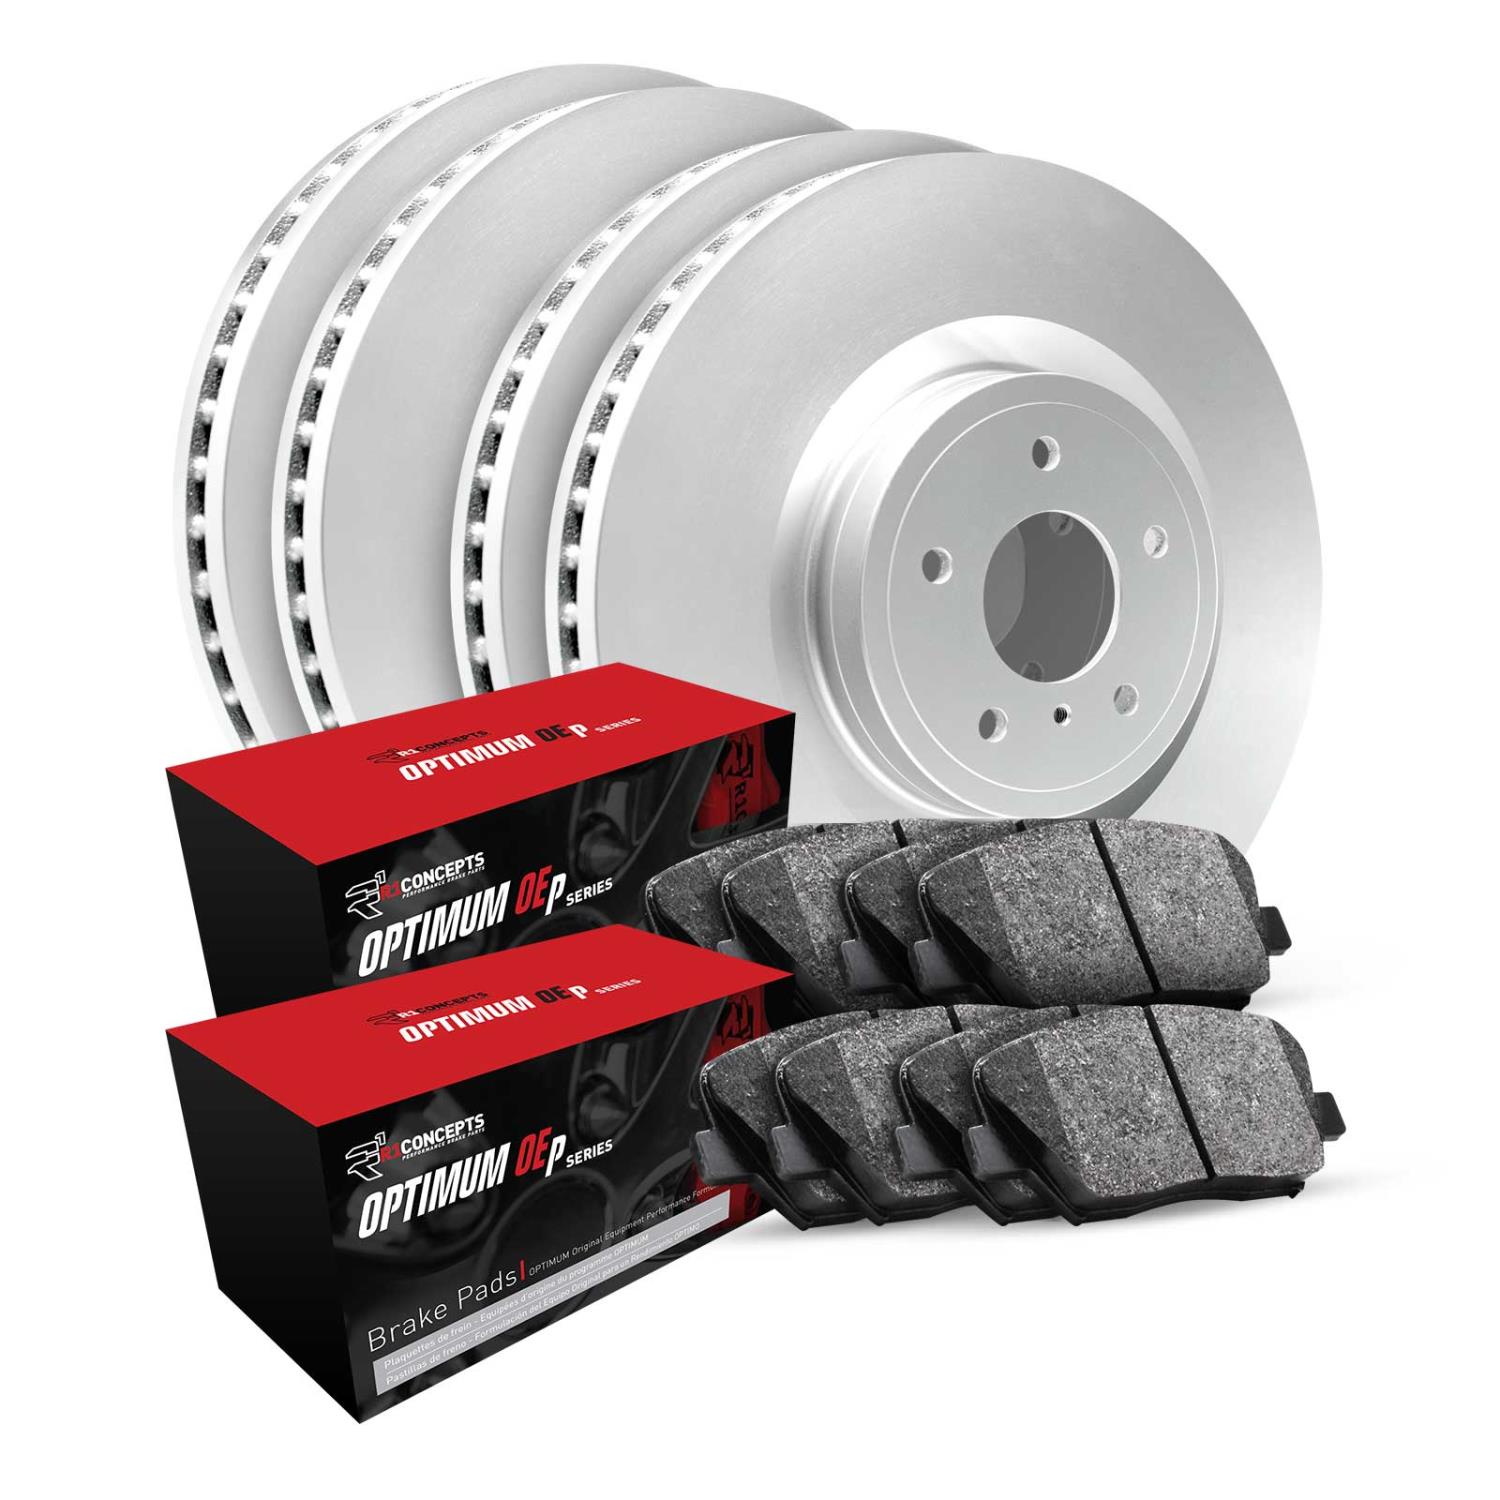 GEO-Carbon Brake Rotor Set w/Optimum OE Pads, Fits Select Acura/Honda, Position: Front & Rear